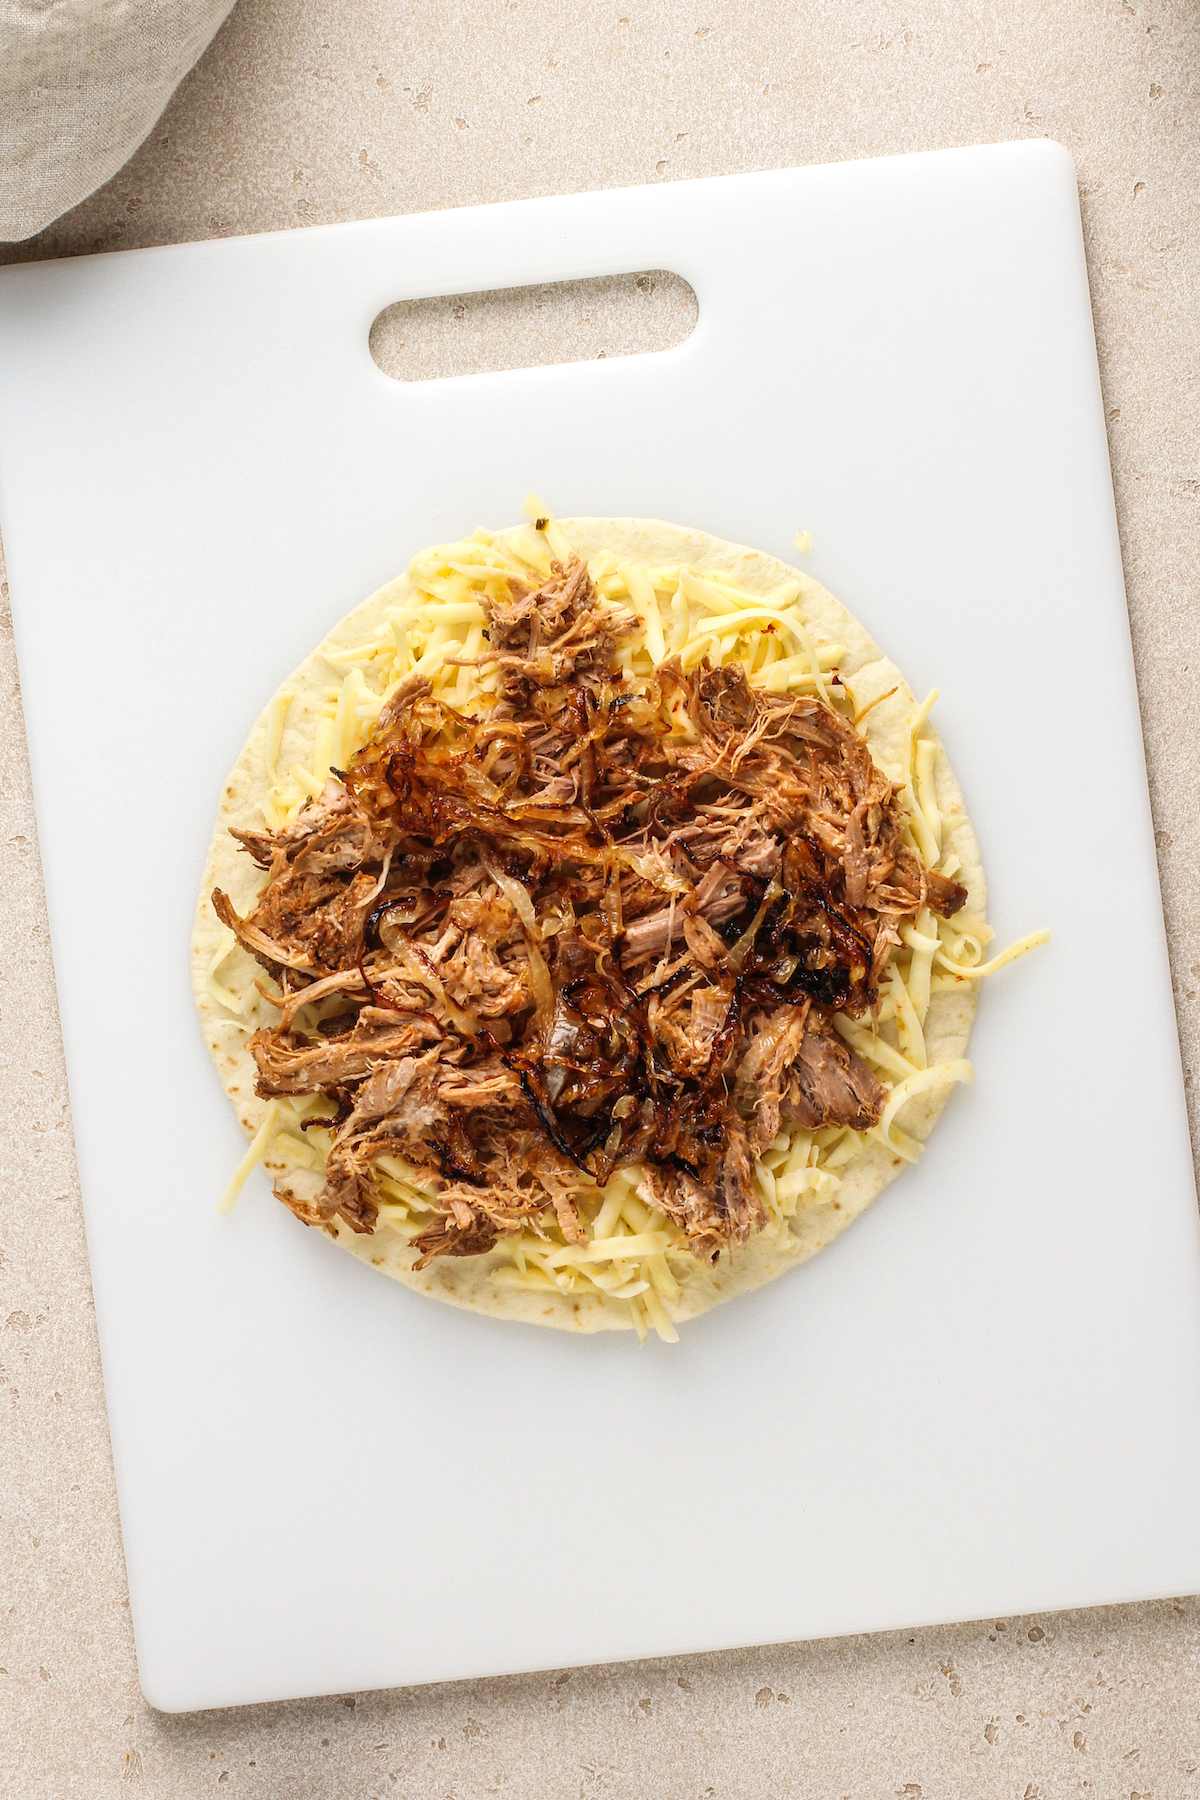 Assembling the quesadilla with pulled pork, cheese, and caramelized onions.